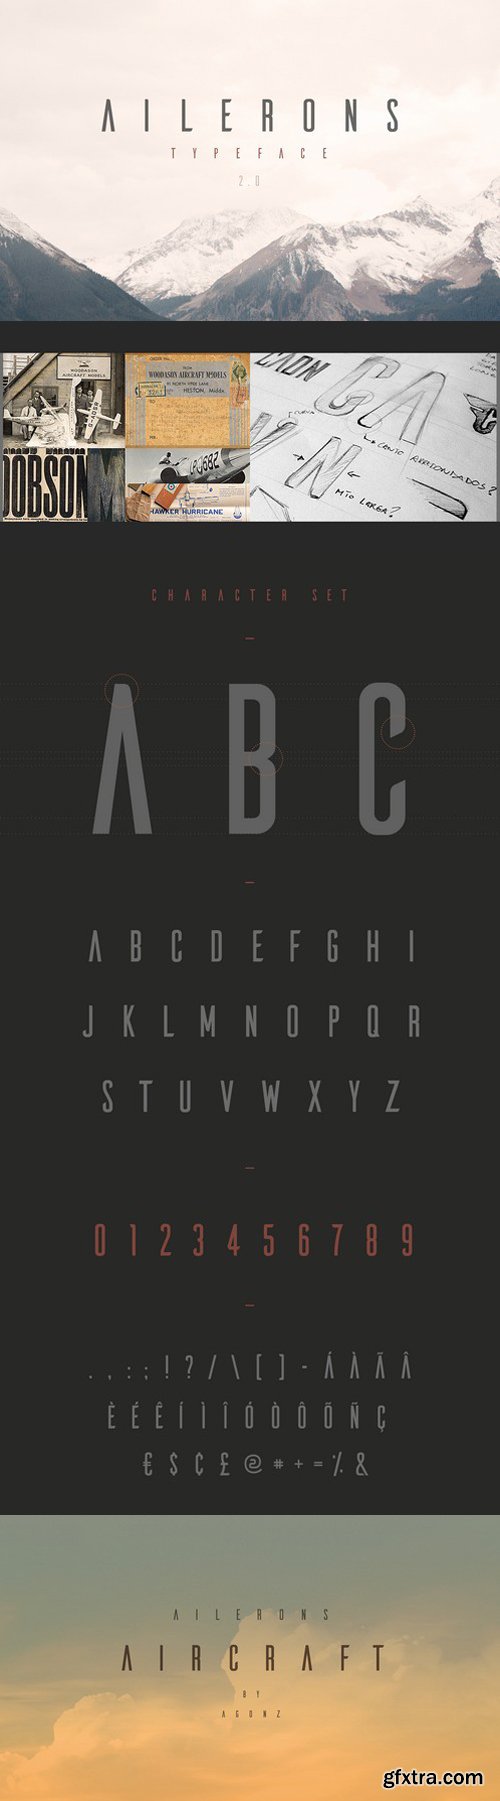 Ailerons Typeface V 2